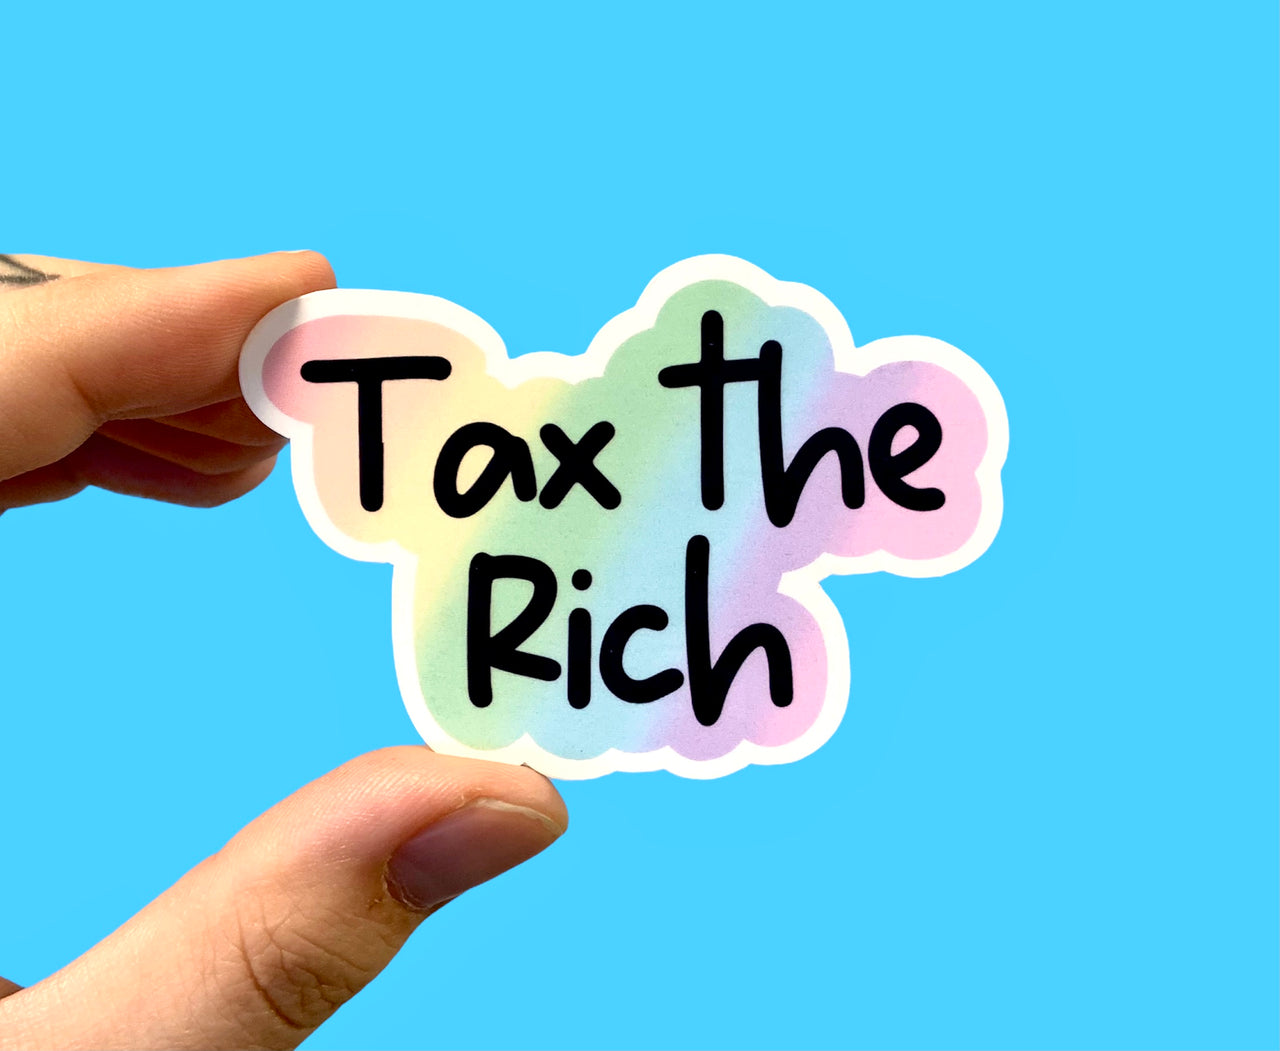 Tax the rich (pack of 3 or 5 stickers)